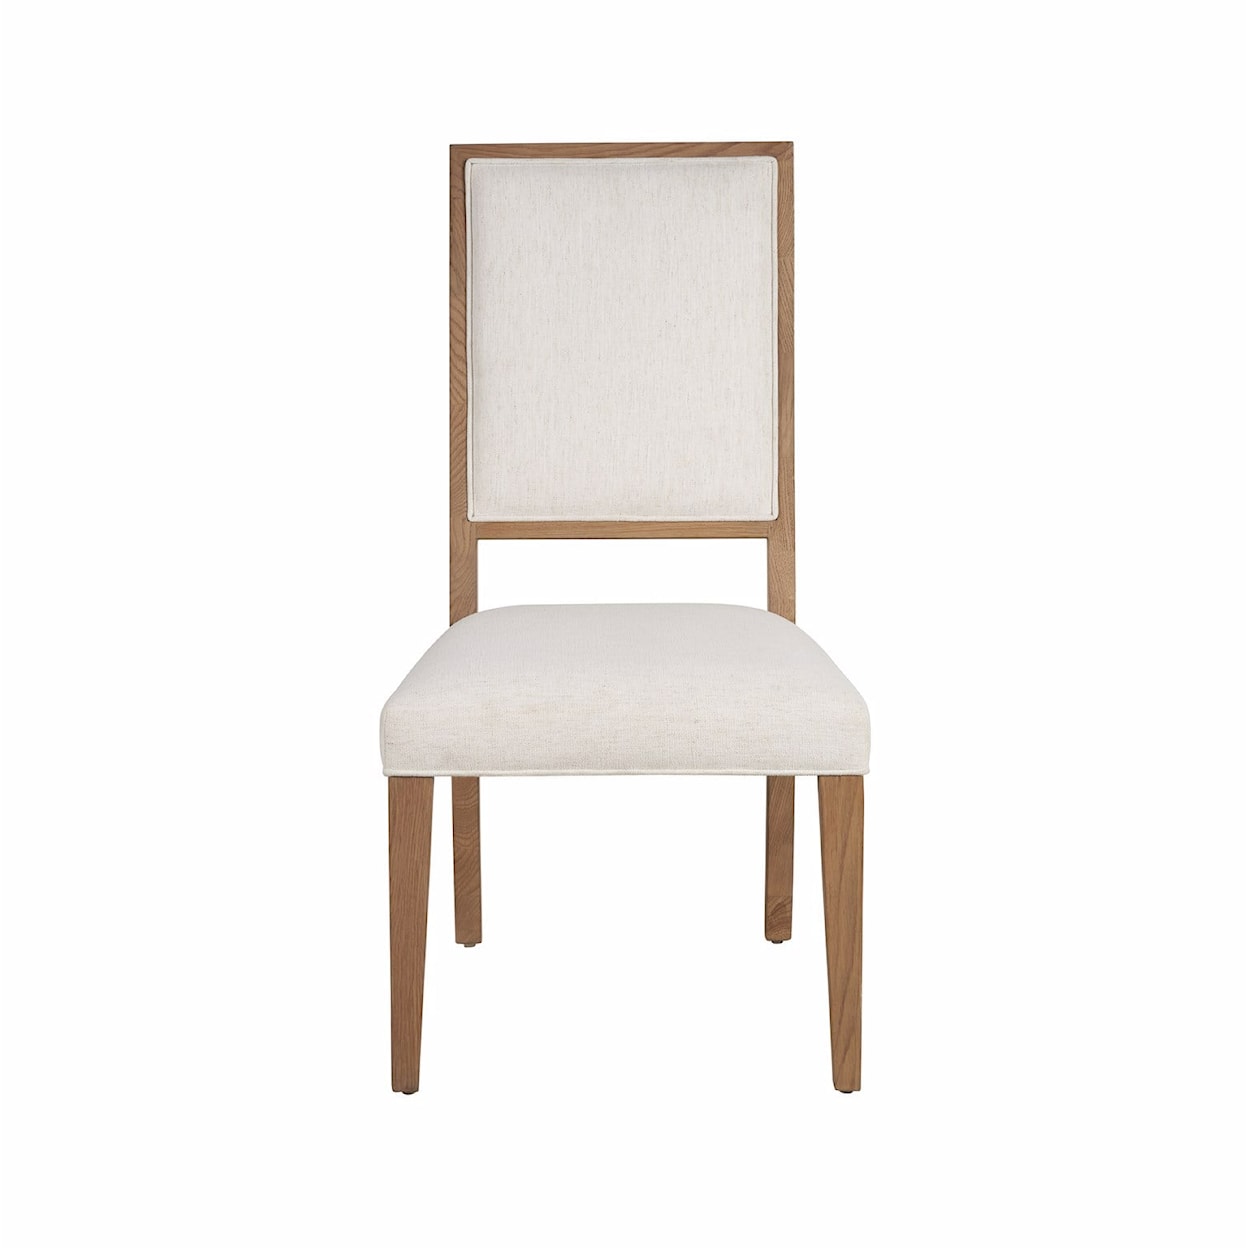 Universal Weekender Coastal Living Home Collection Upholstered Dining Chair